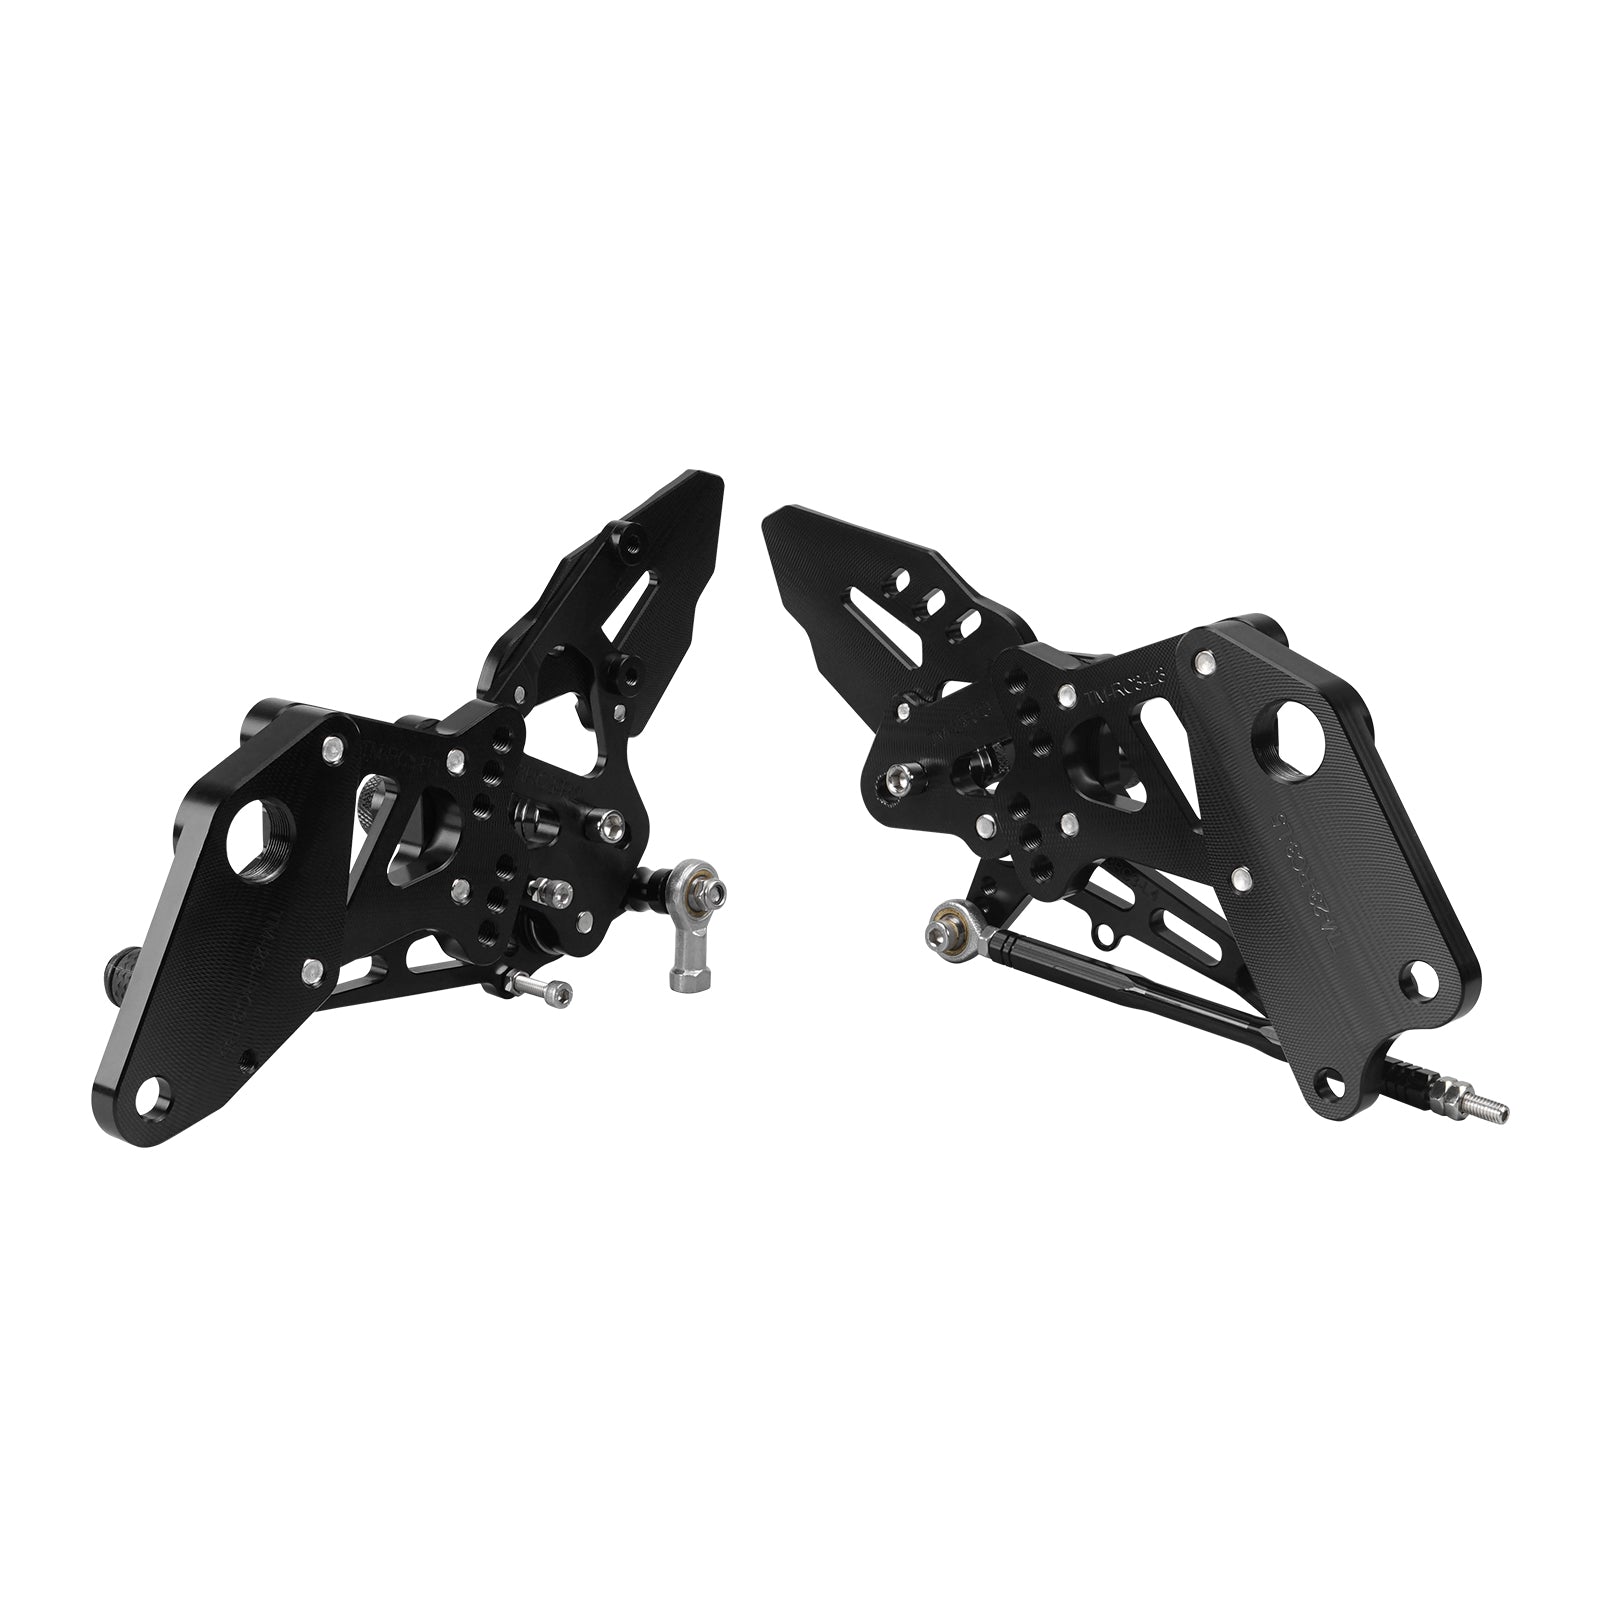 Rearset Racing Footrest Kit with Brake Shift Levers & Rod For KTM RC 390 2022-2023